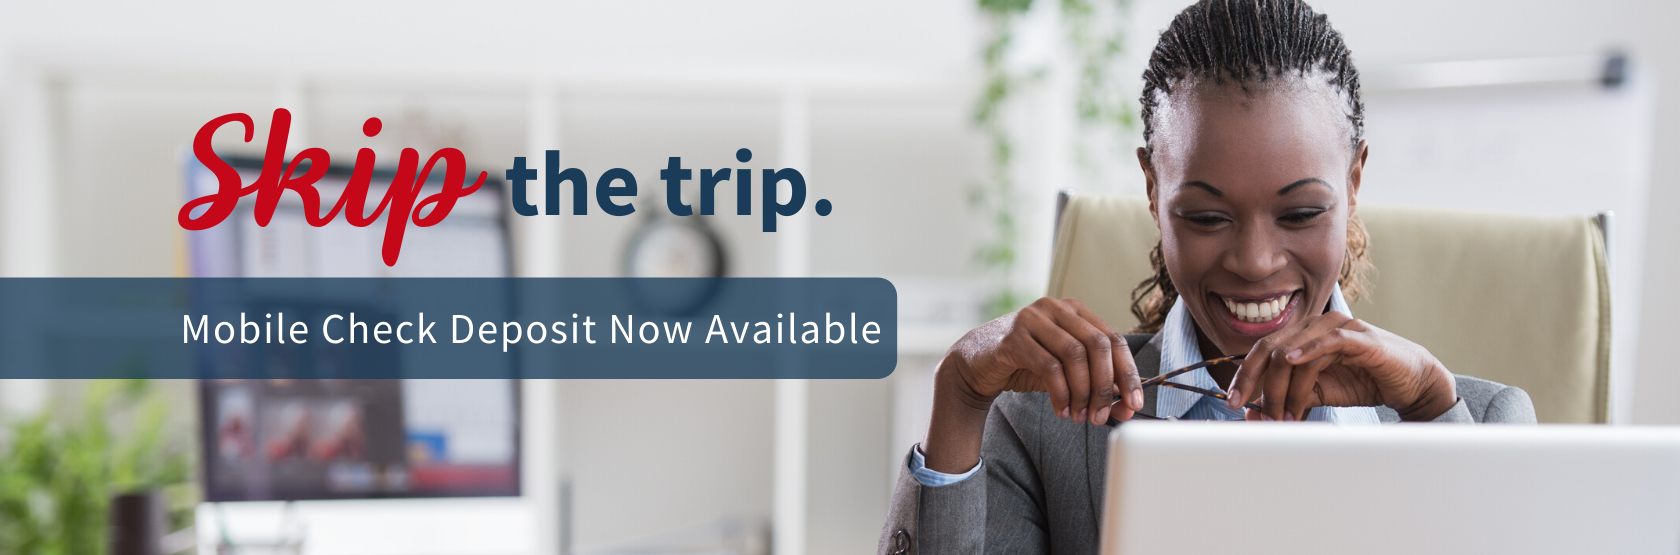 Skip the trip, mobile deposit now available